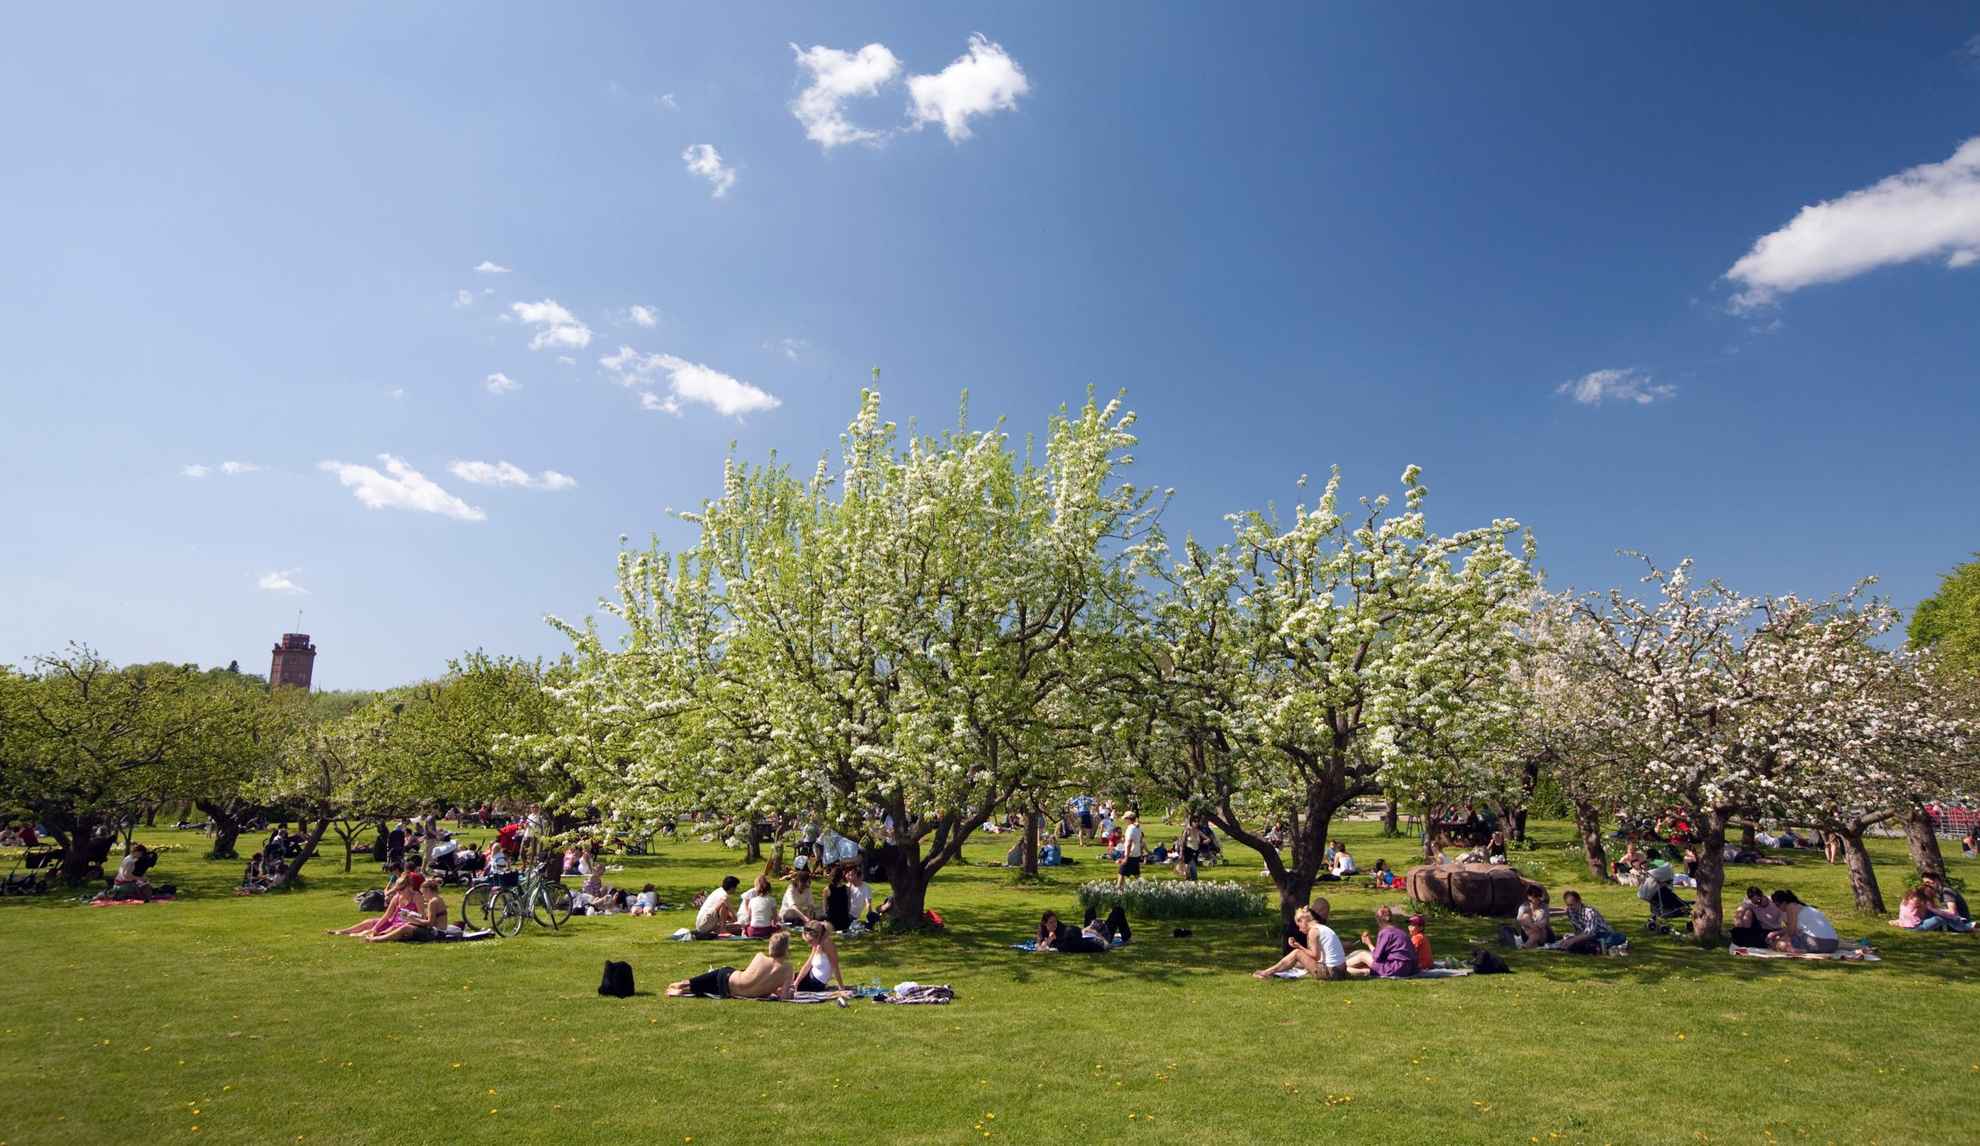 Groups of people sit on the grass under the apple trees at Rosendal’s Garden in Stockholm.